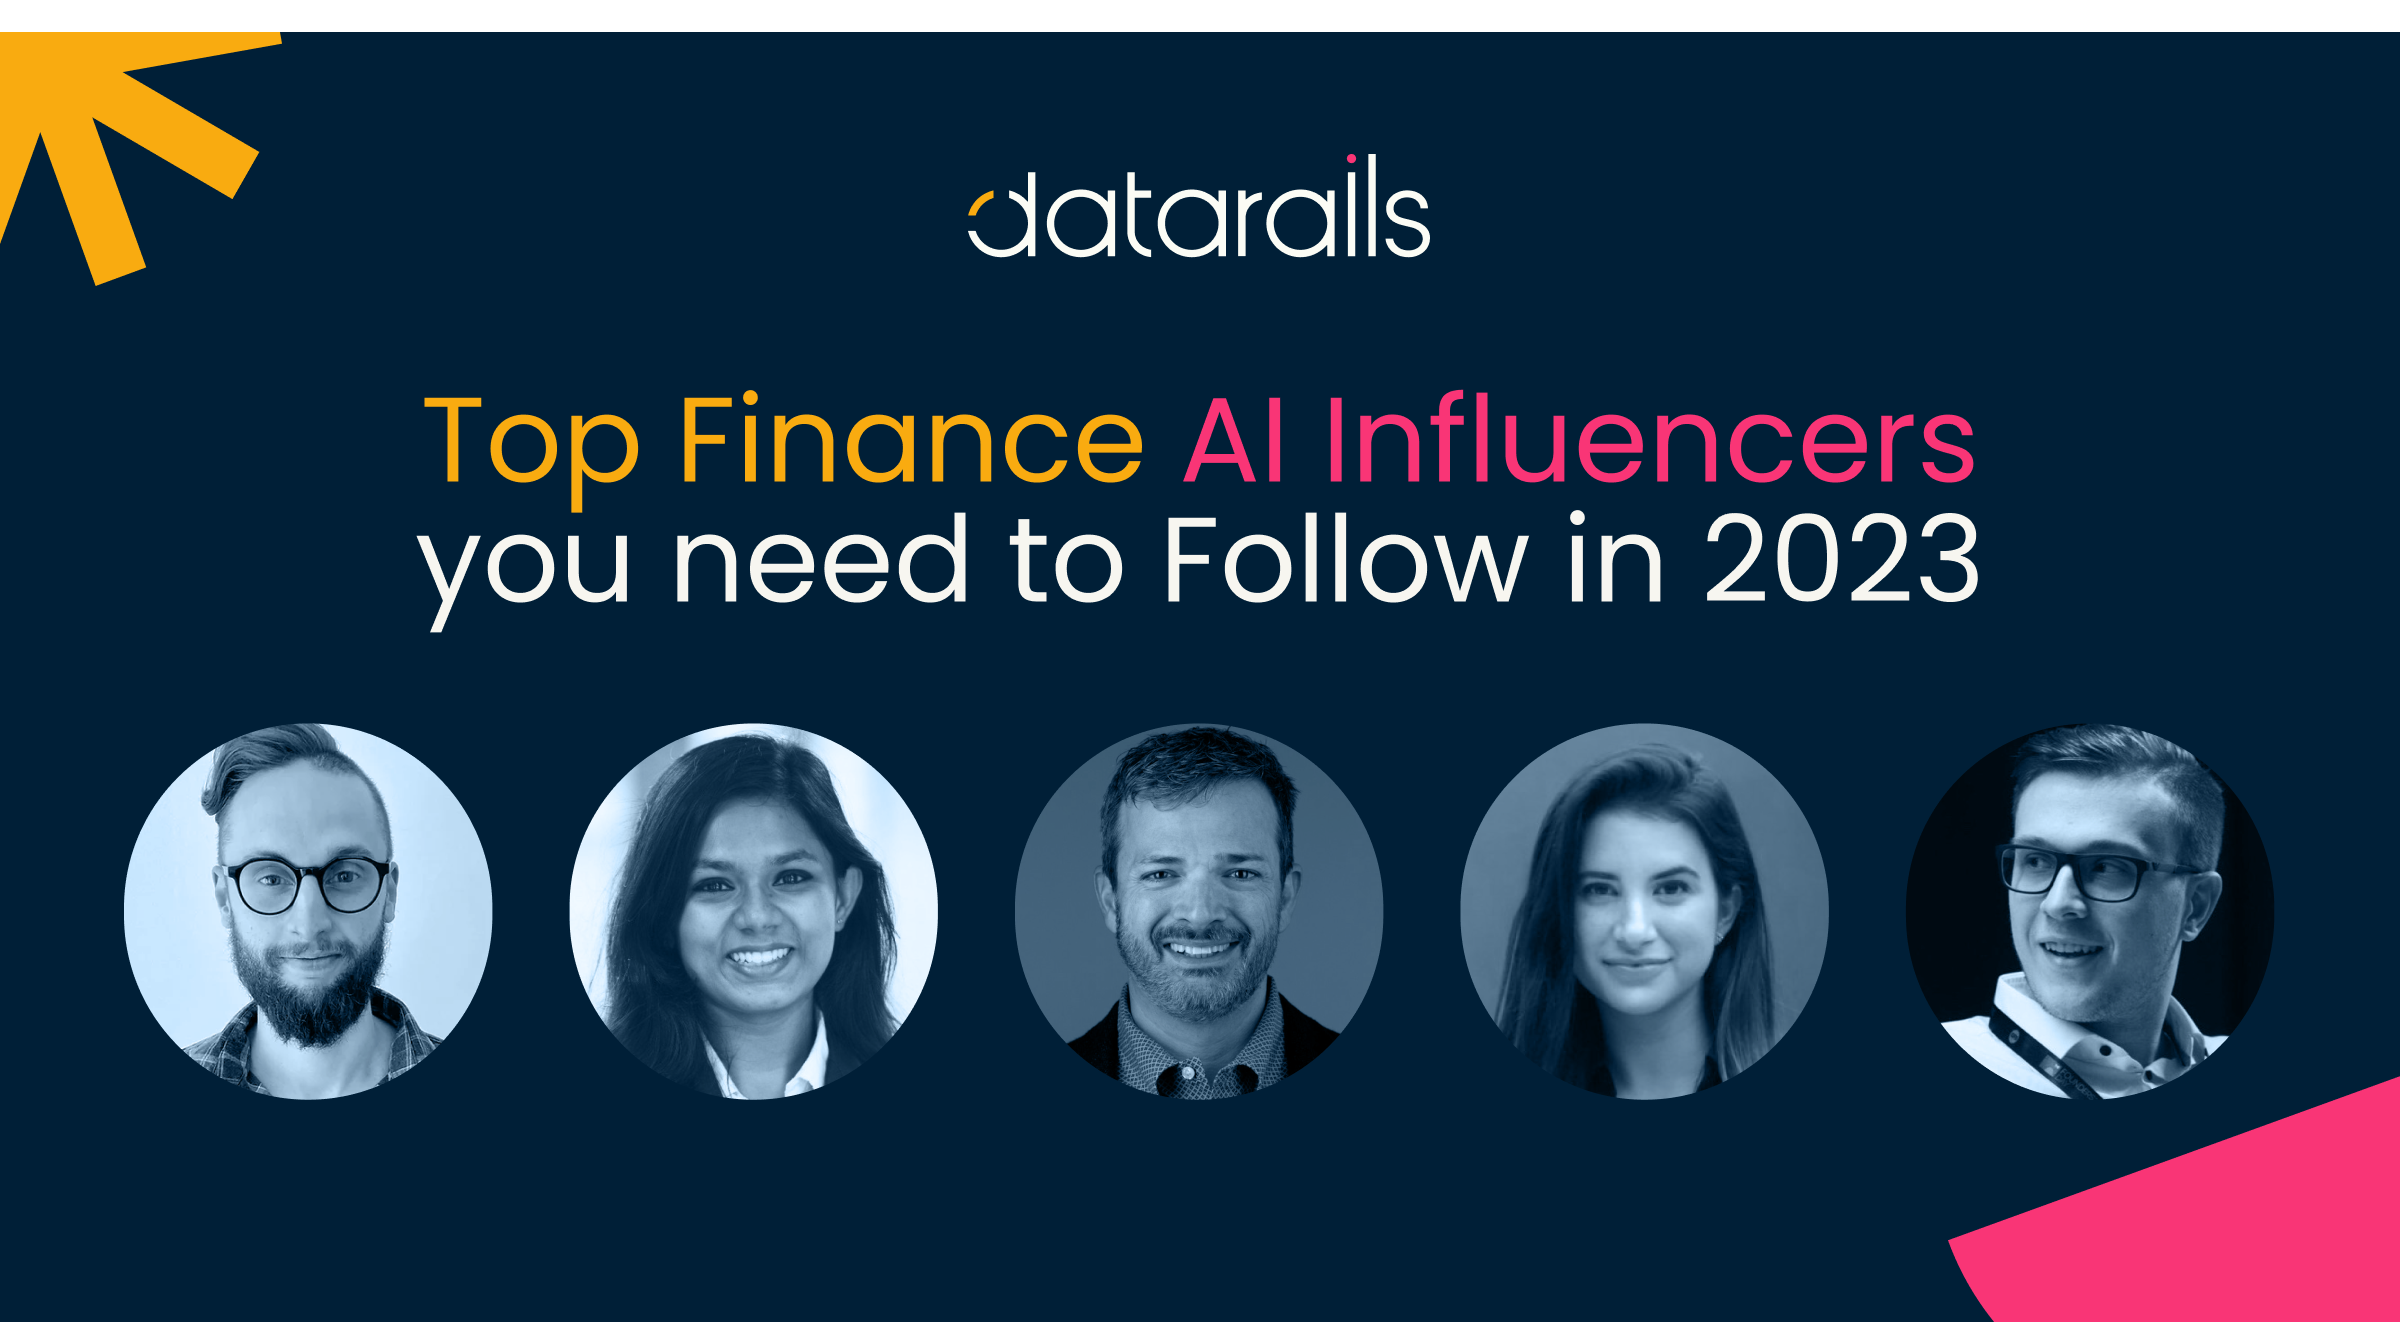 12 Top Finance AI Influencers you need to follow